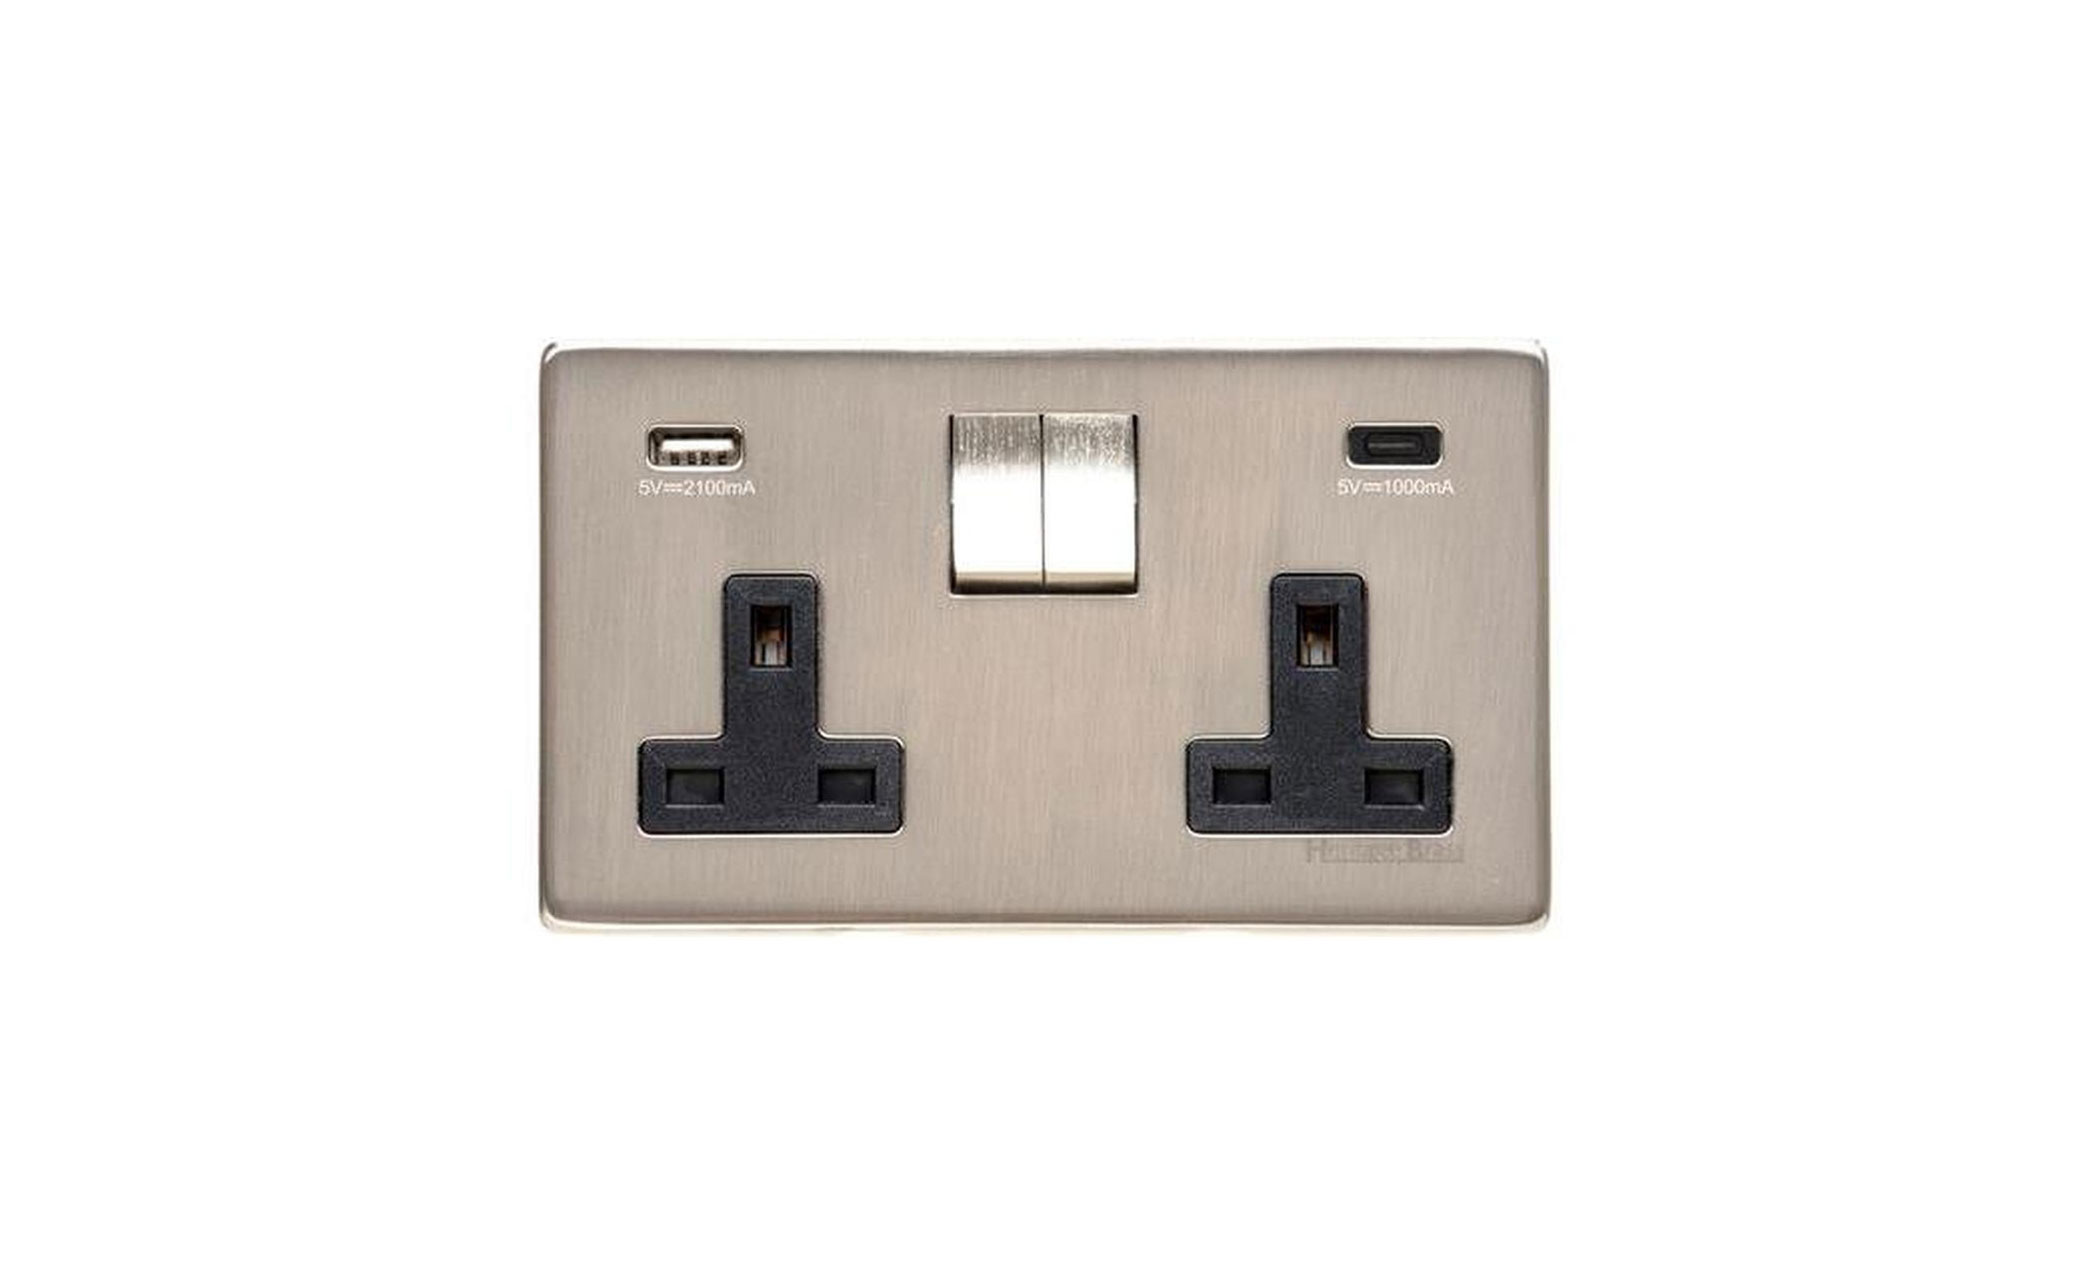 USB A+C Port Double Socket in Satin Nickel Finish with Black Inserts.